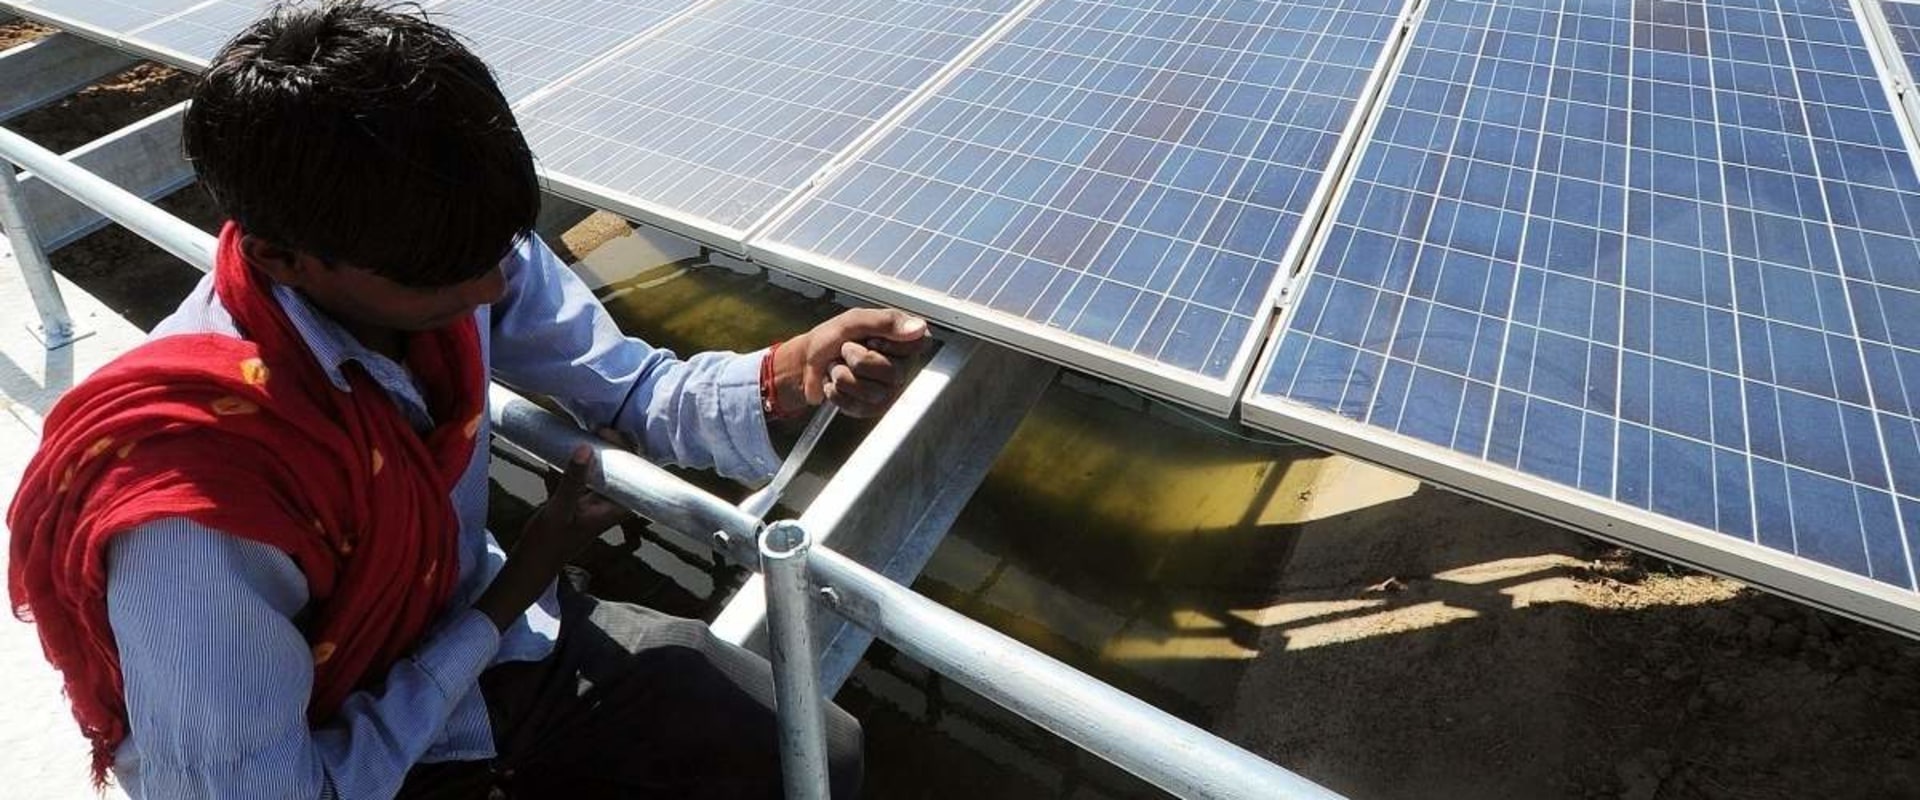 Professional Maintenance Services for Rooftop Solar Panels